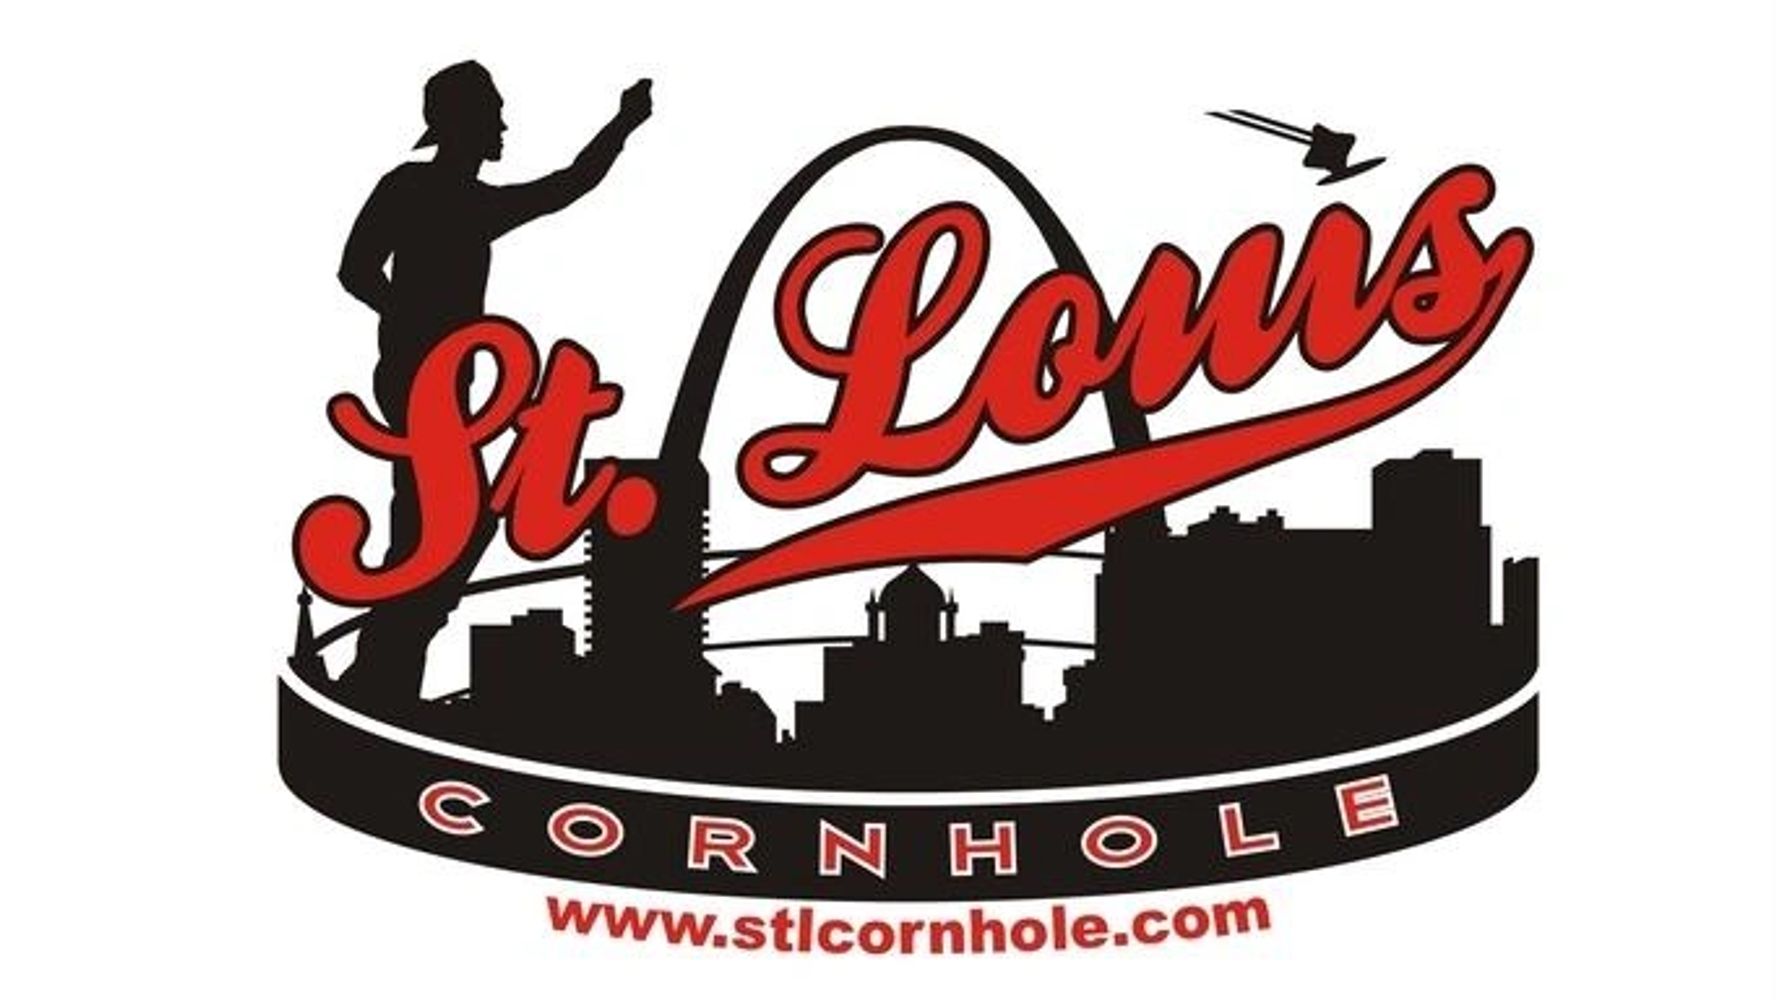 St. Louis Cornhole Game.   The #1 Cornhole Bags and Boards seller in the St. Louis, Missouri area.